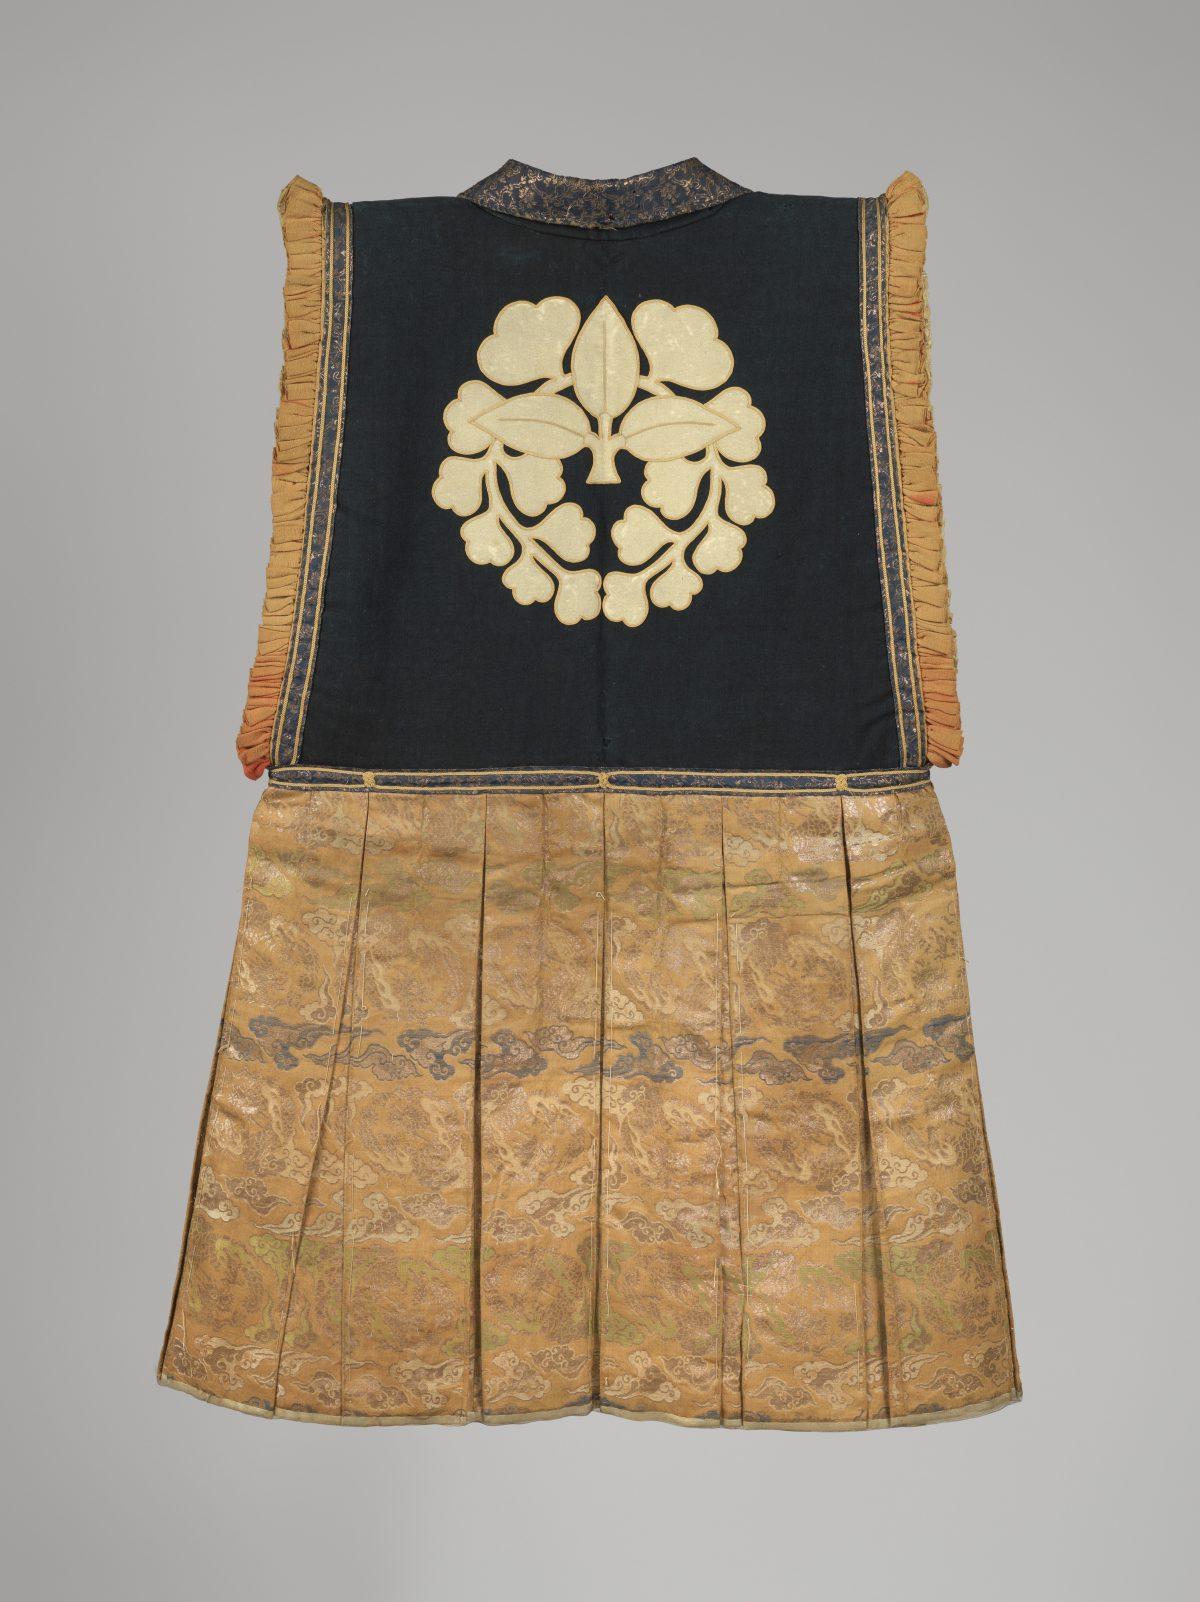 The back of a surcoat (jinbaori). This luxurious and elegant Momoyama period jinbaori is of a very rare type; only three similar examples are known. Mary Livingston Griggs and Mary Griggs Burke Foundation Fund, 2017. (The Metropolitan Museum of Art)